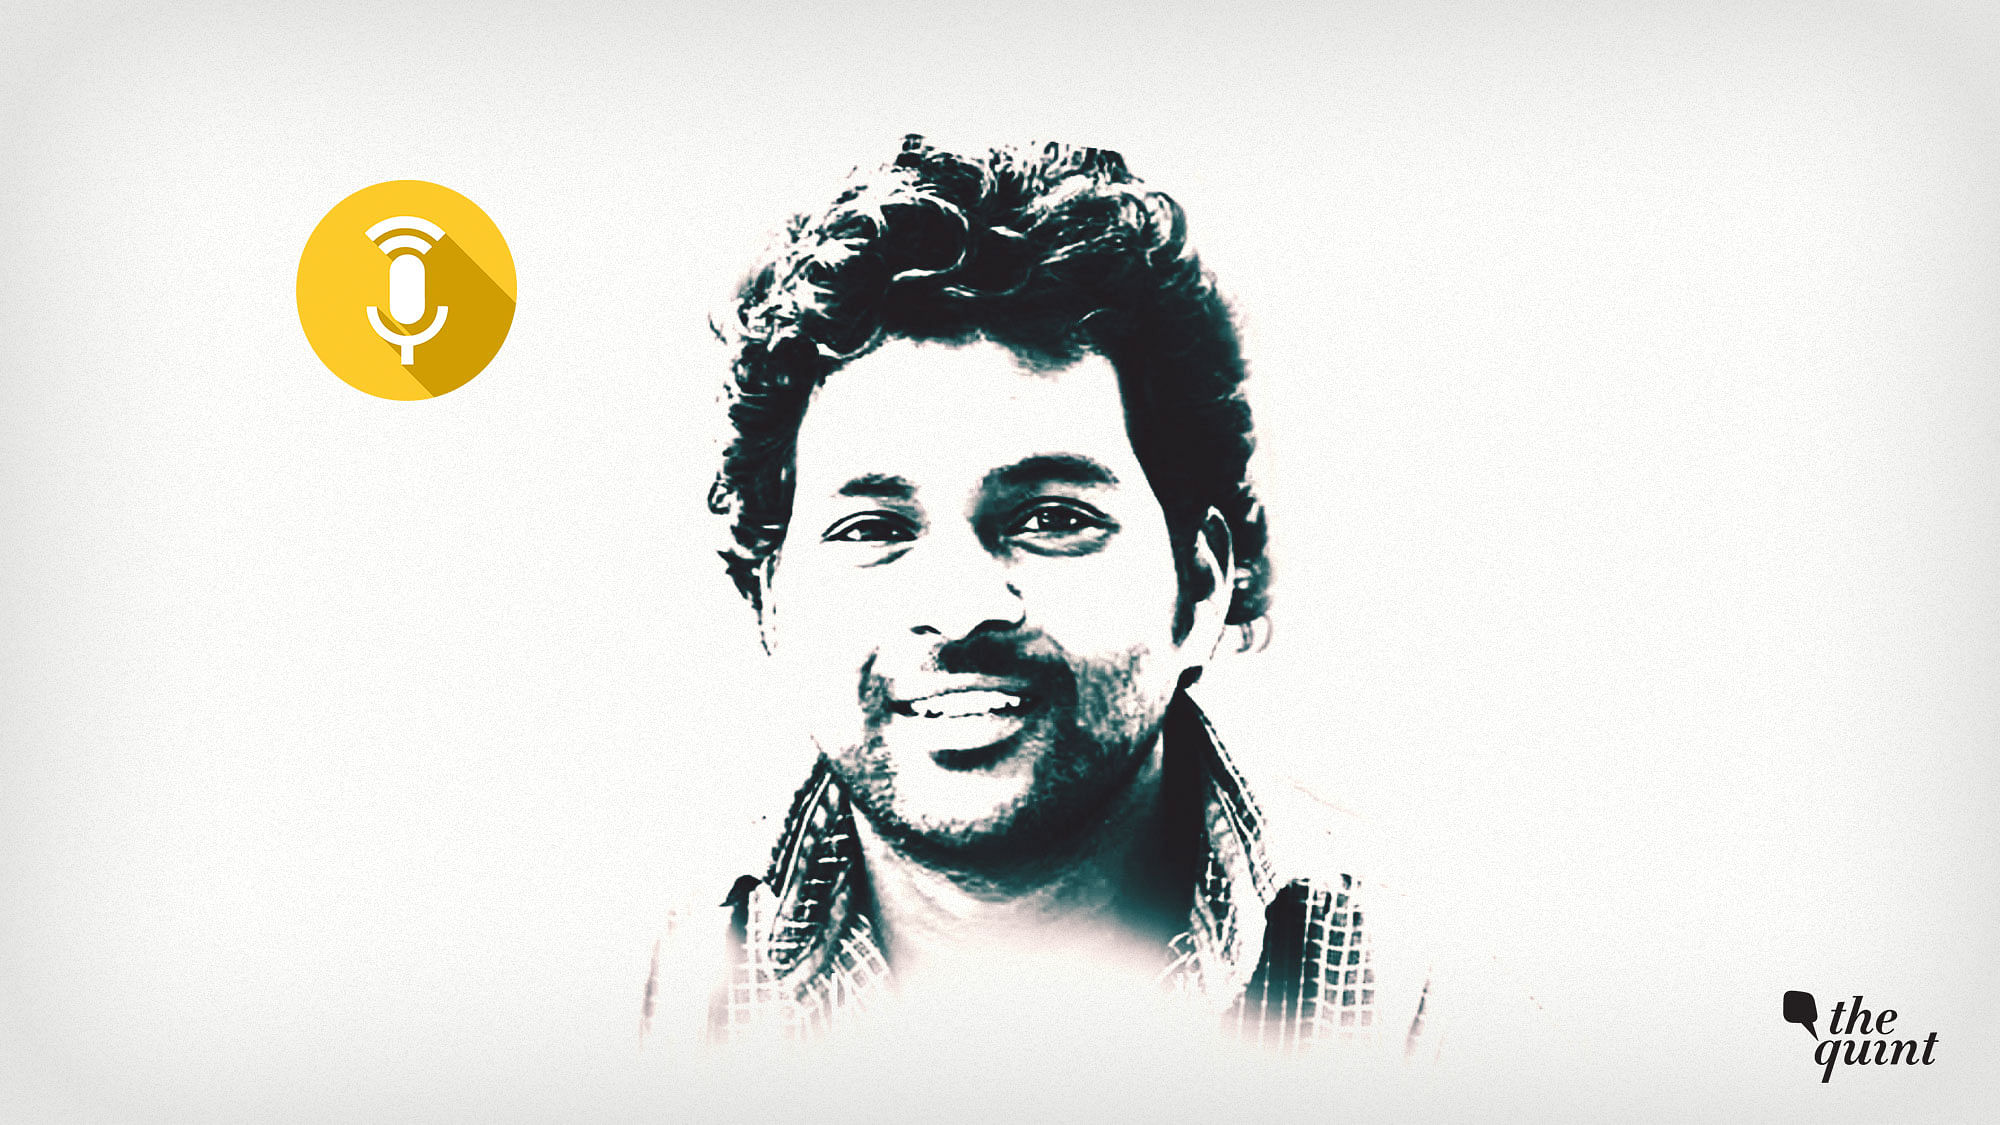 Rohith Vemula took his own life on 16 January 2016. On his third death anniversary, we spoke to his brother Raja Vemula. Listen to the podcast by clicking on this player: